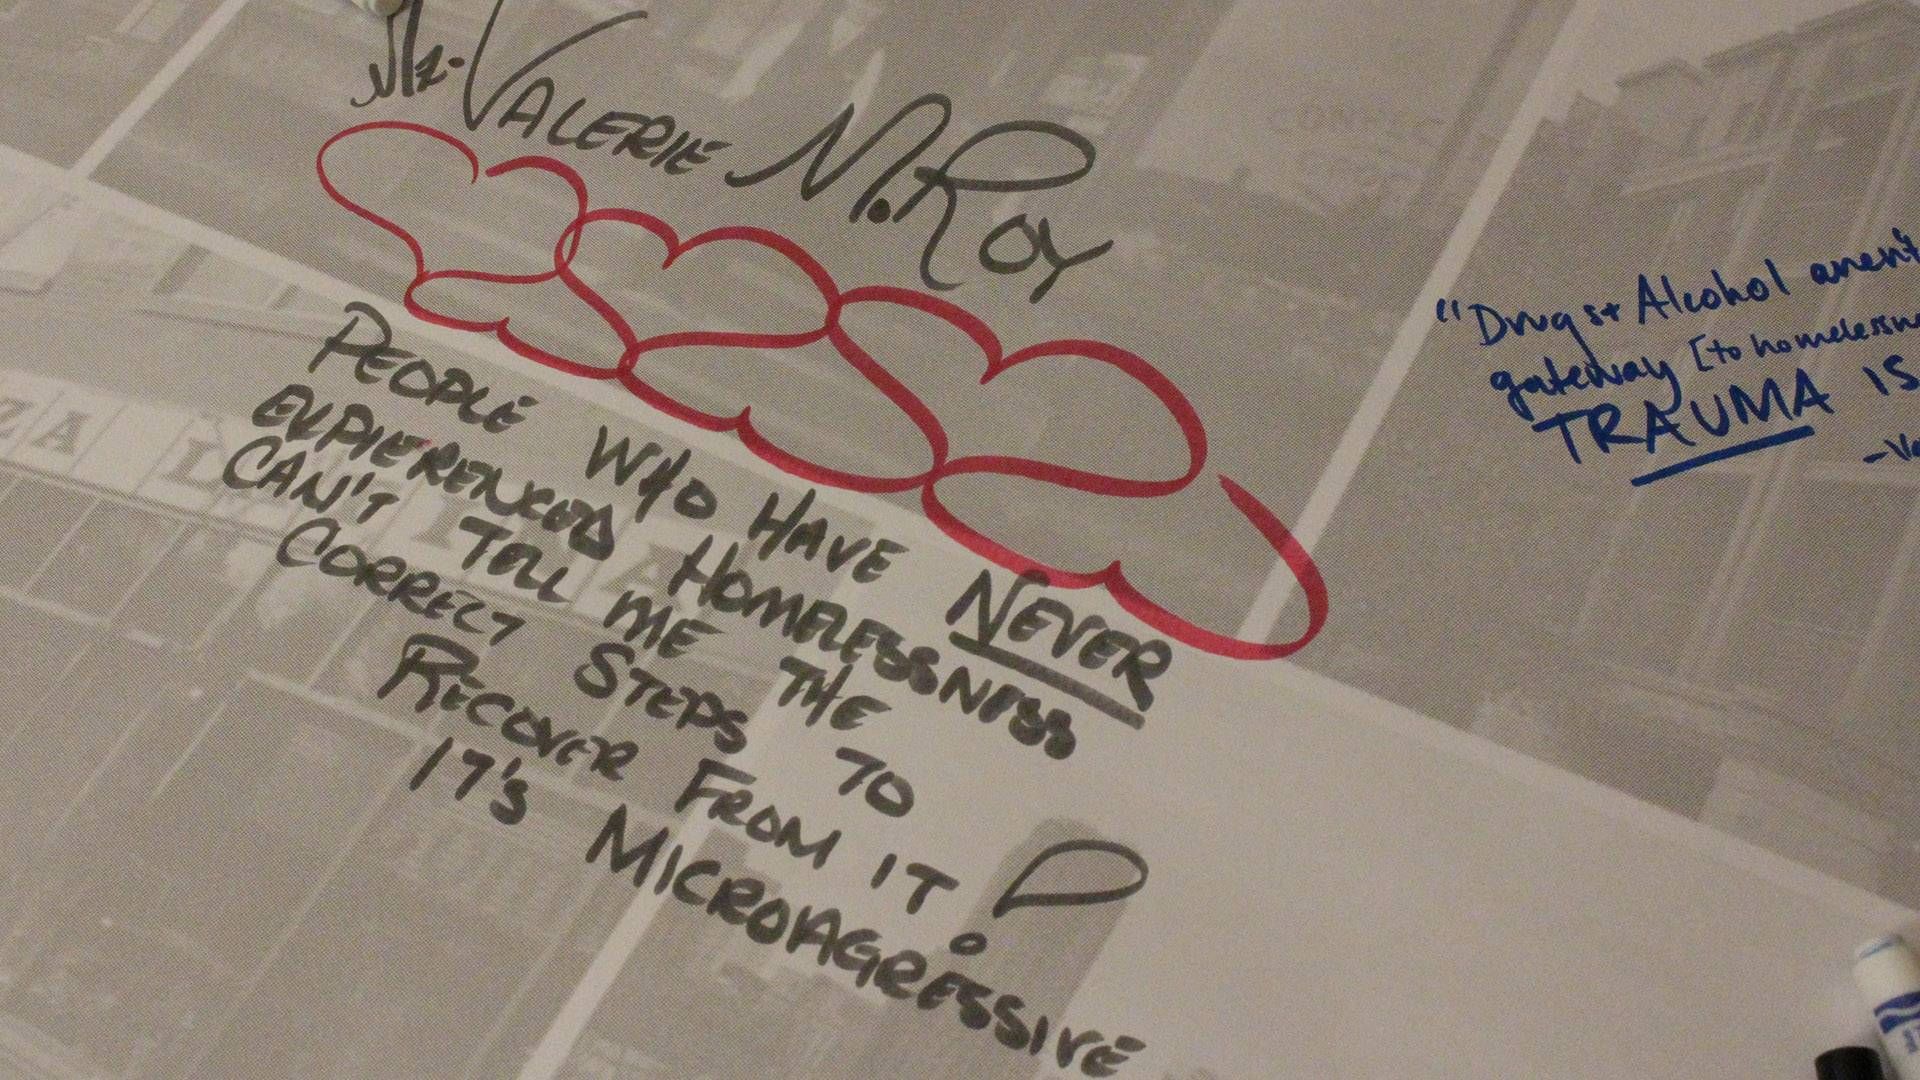 Comments shared in marker on a community poster